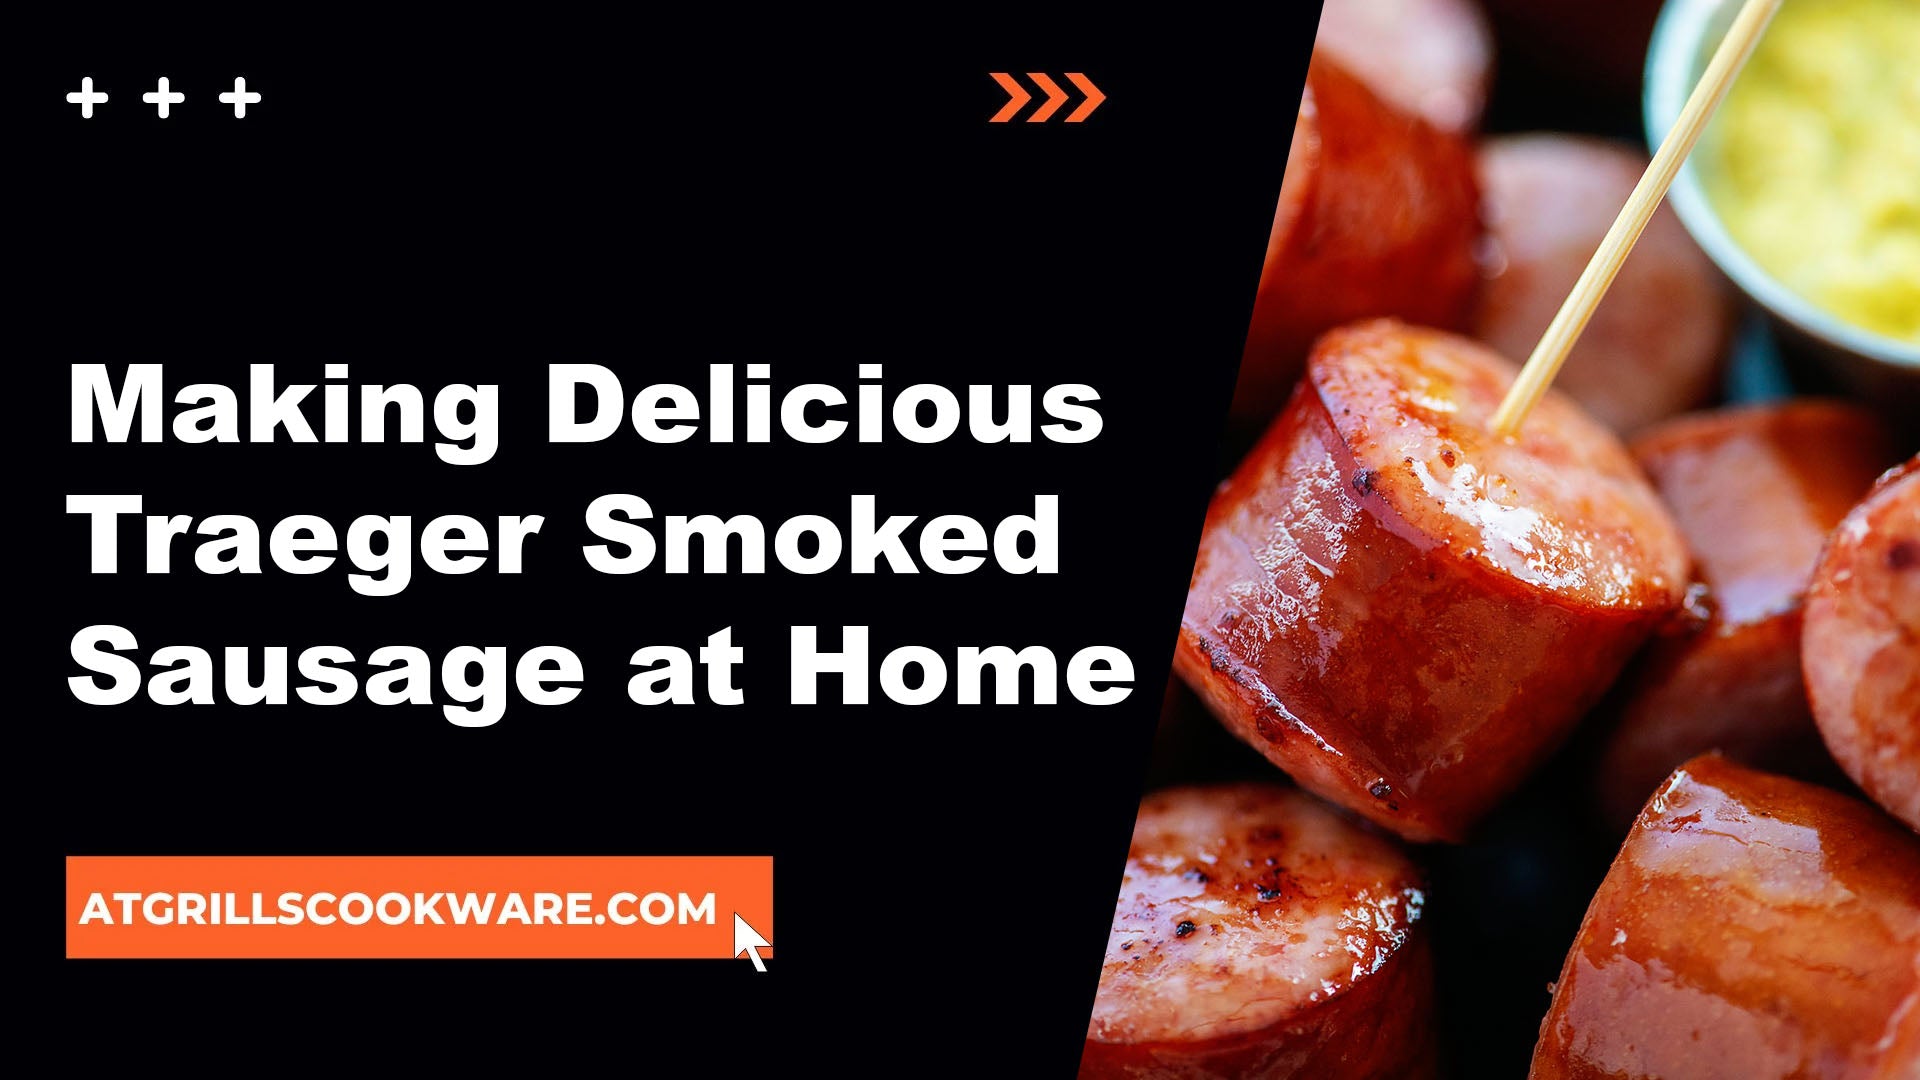 Making Delicious Traeger Smoked Sausage at Home